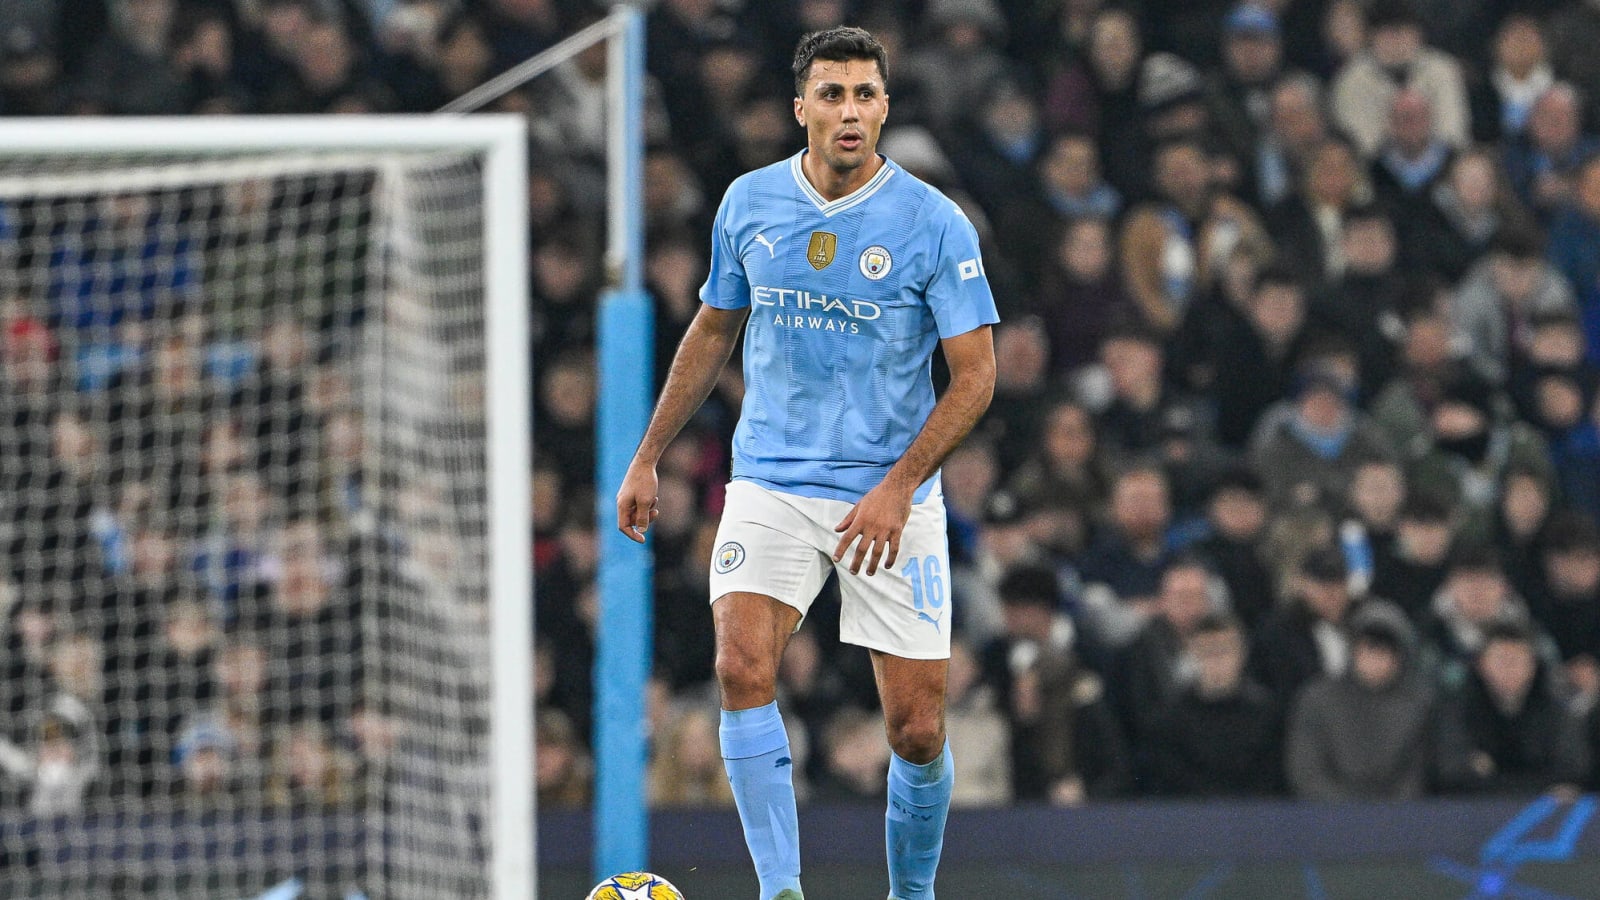 City’s midfield general has a crucial role to play at Anfield